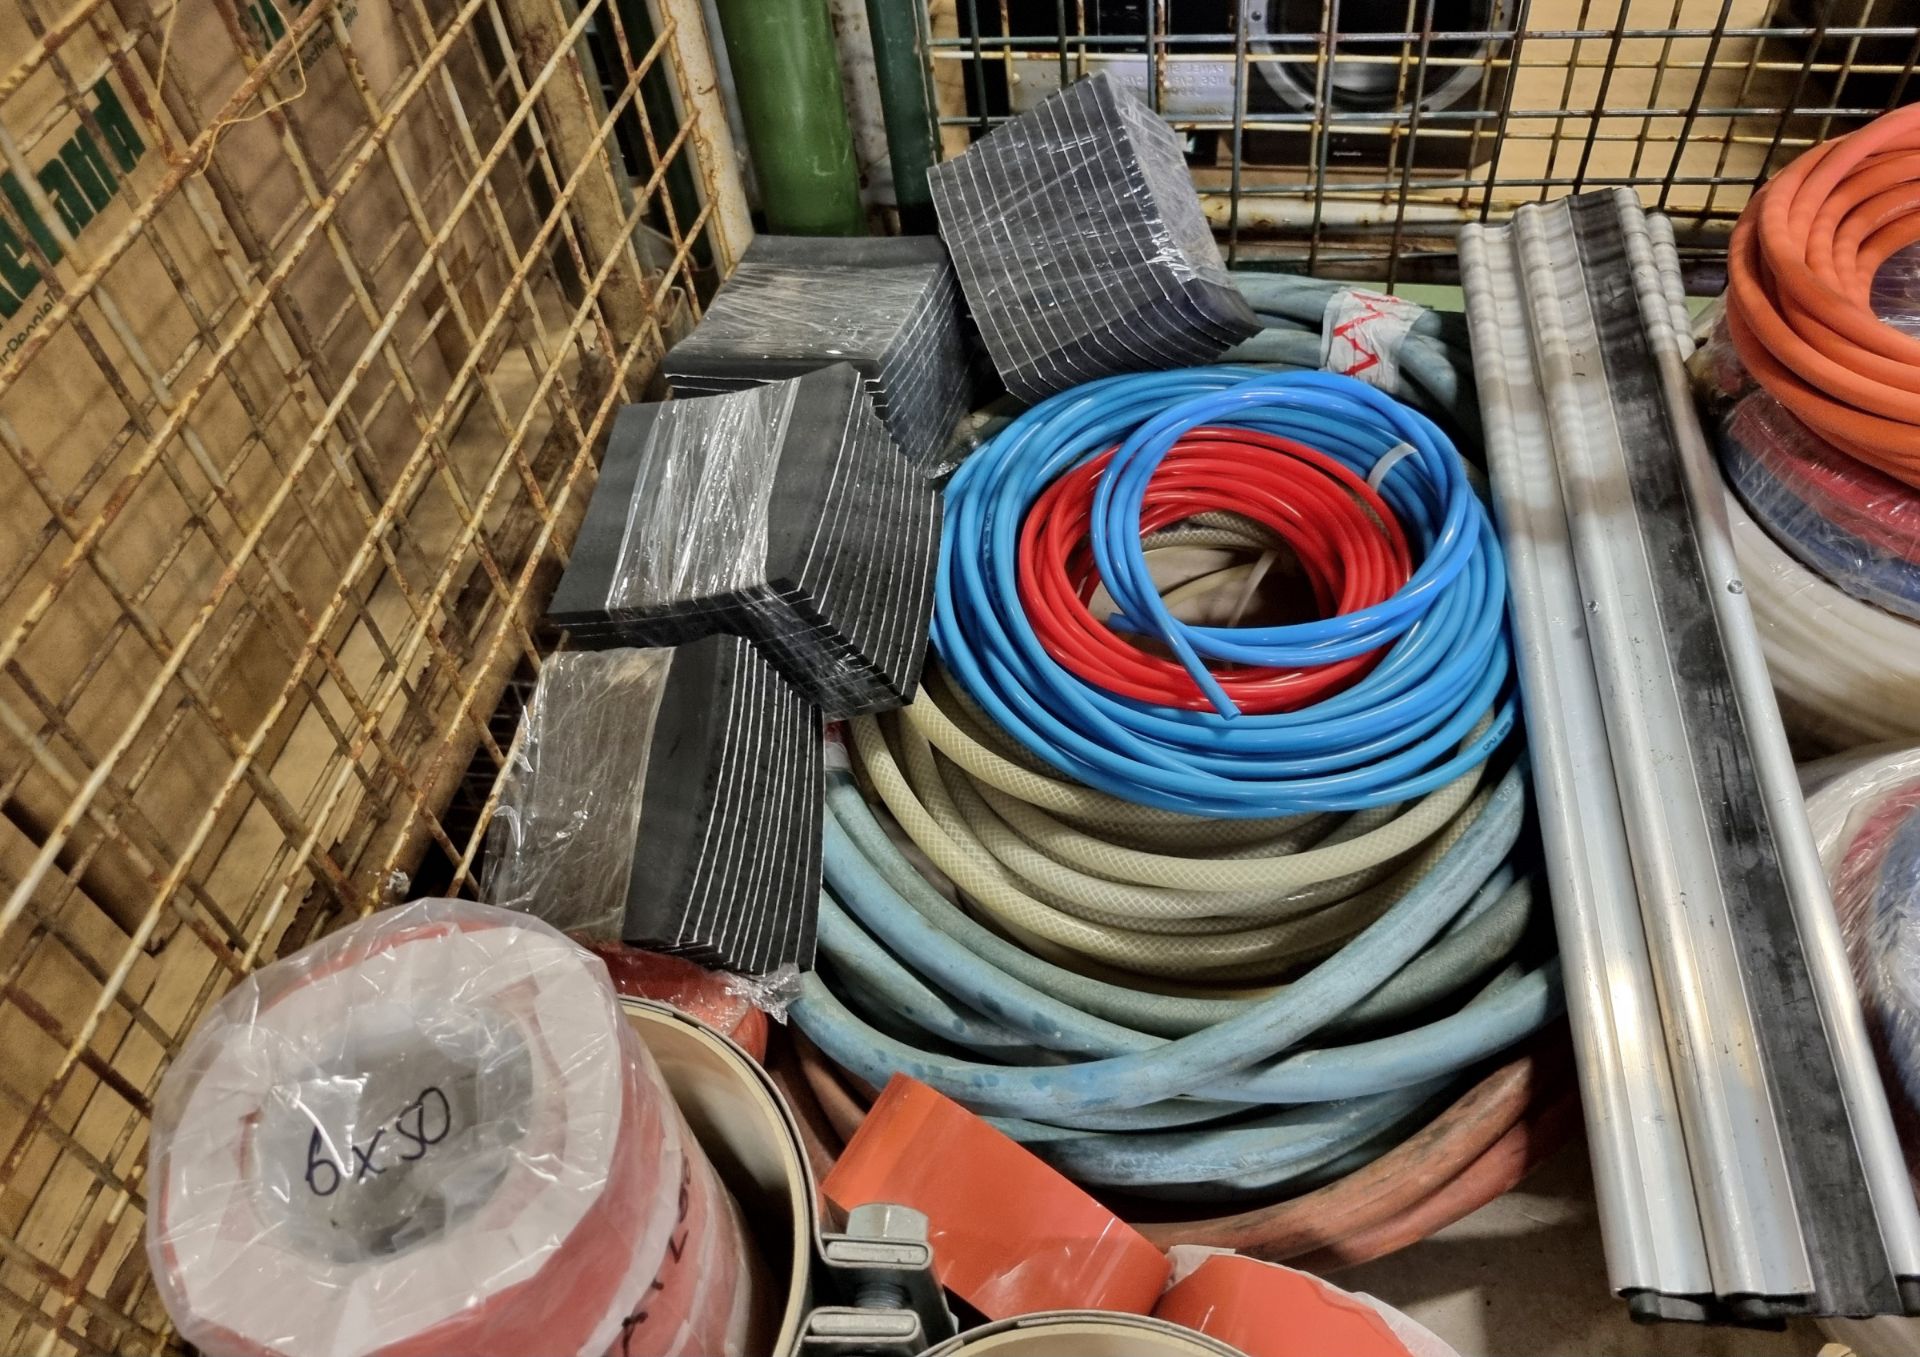 Workshop supplies and consumables - asbestos waste bags, hazard tape, air line, pressure hose - Image 4 of 6